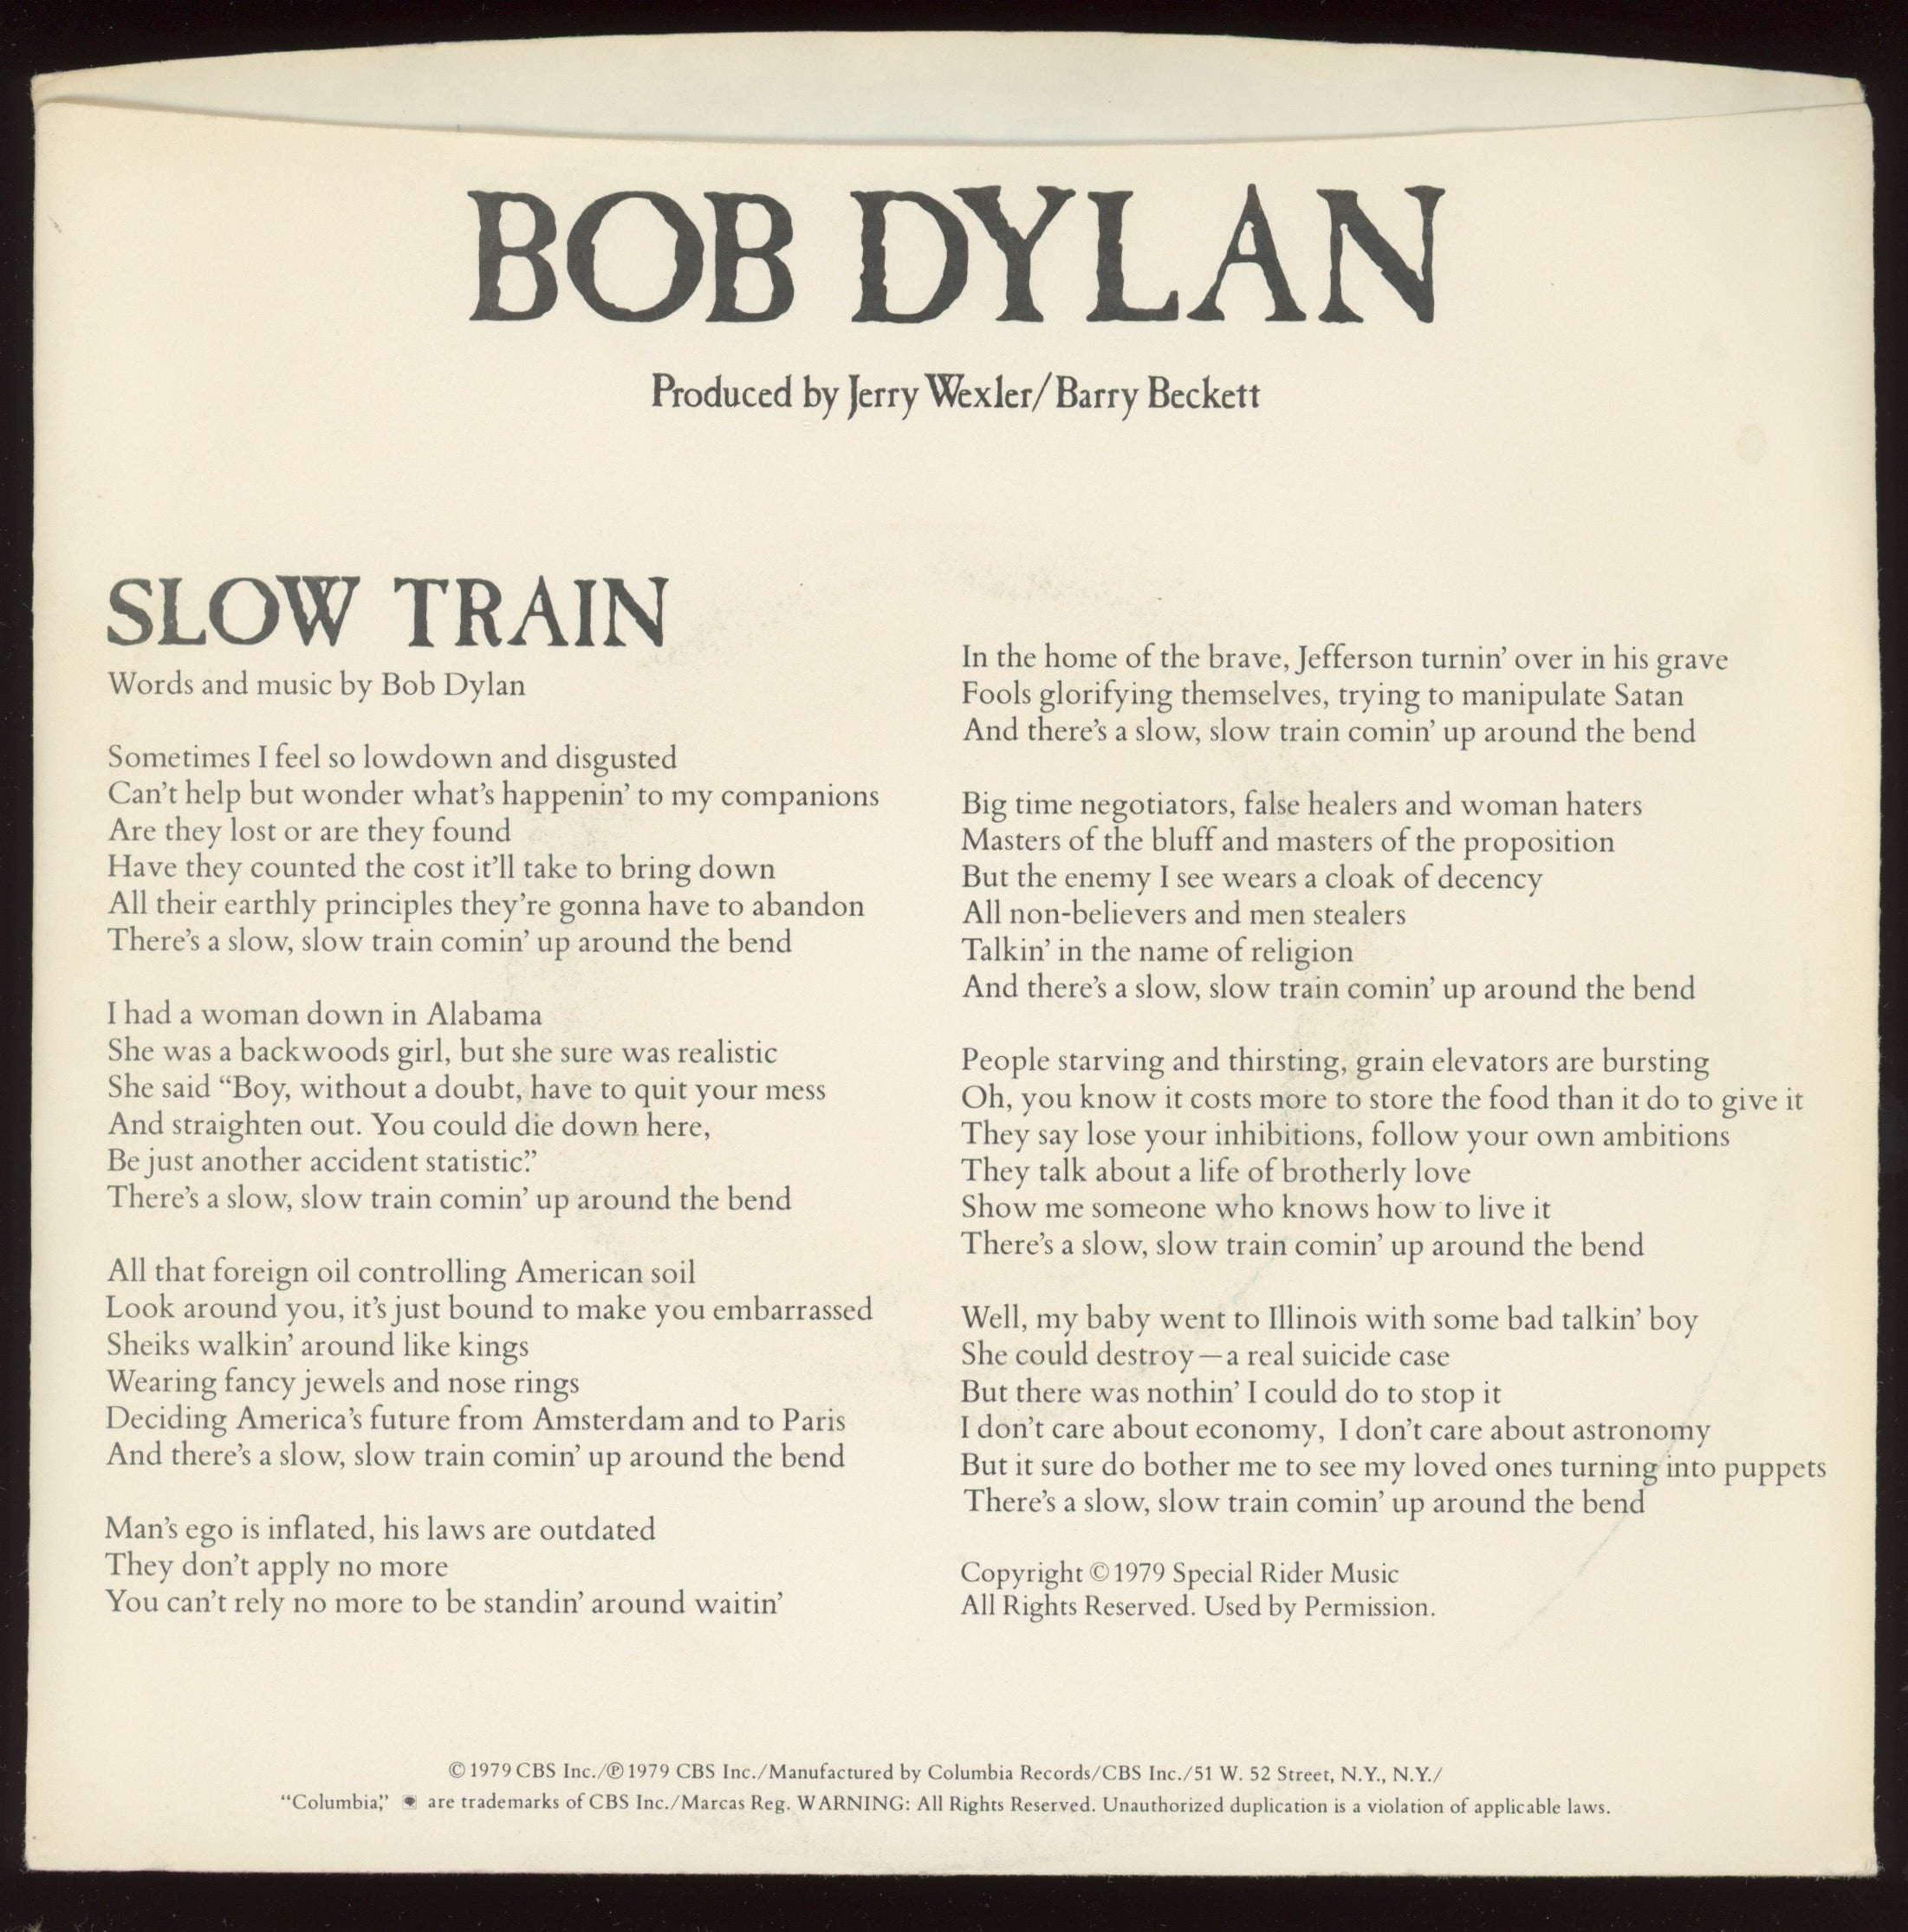 Bob Dylan - Slow Train on Columbia With Picture Sleeve